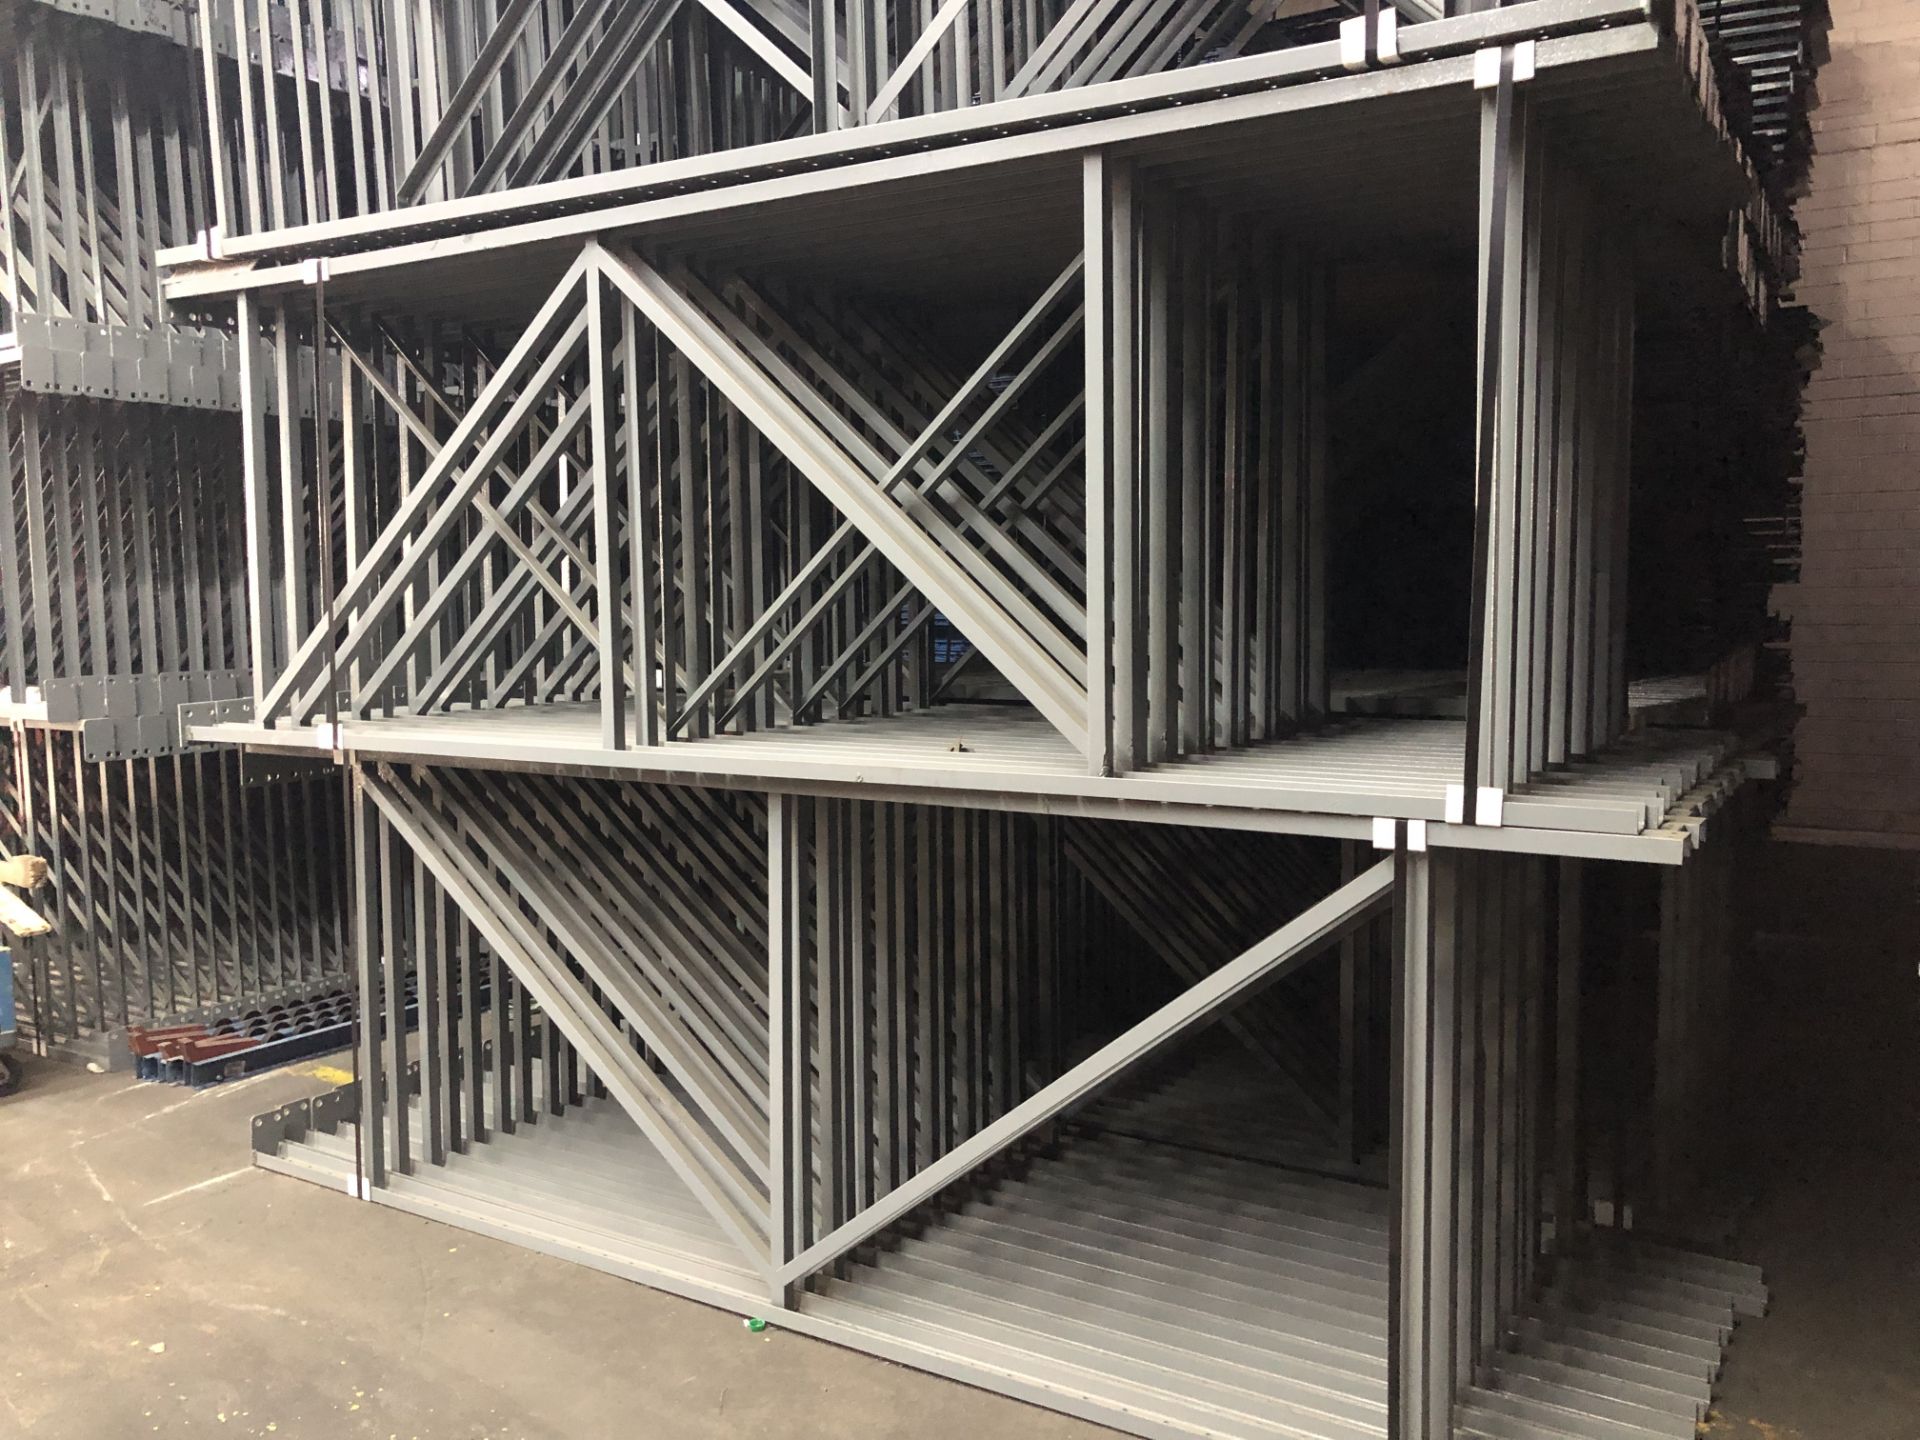 14 BAYS OF 10.5'H X 42"D X 93"L STRUCTURAL STYLE PALLET RACKS - Image 2 of 3